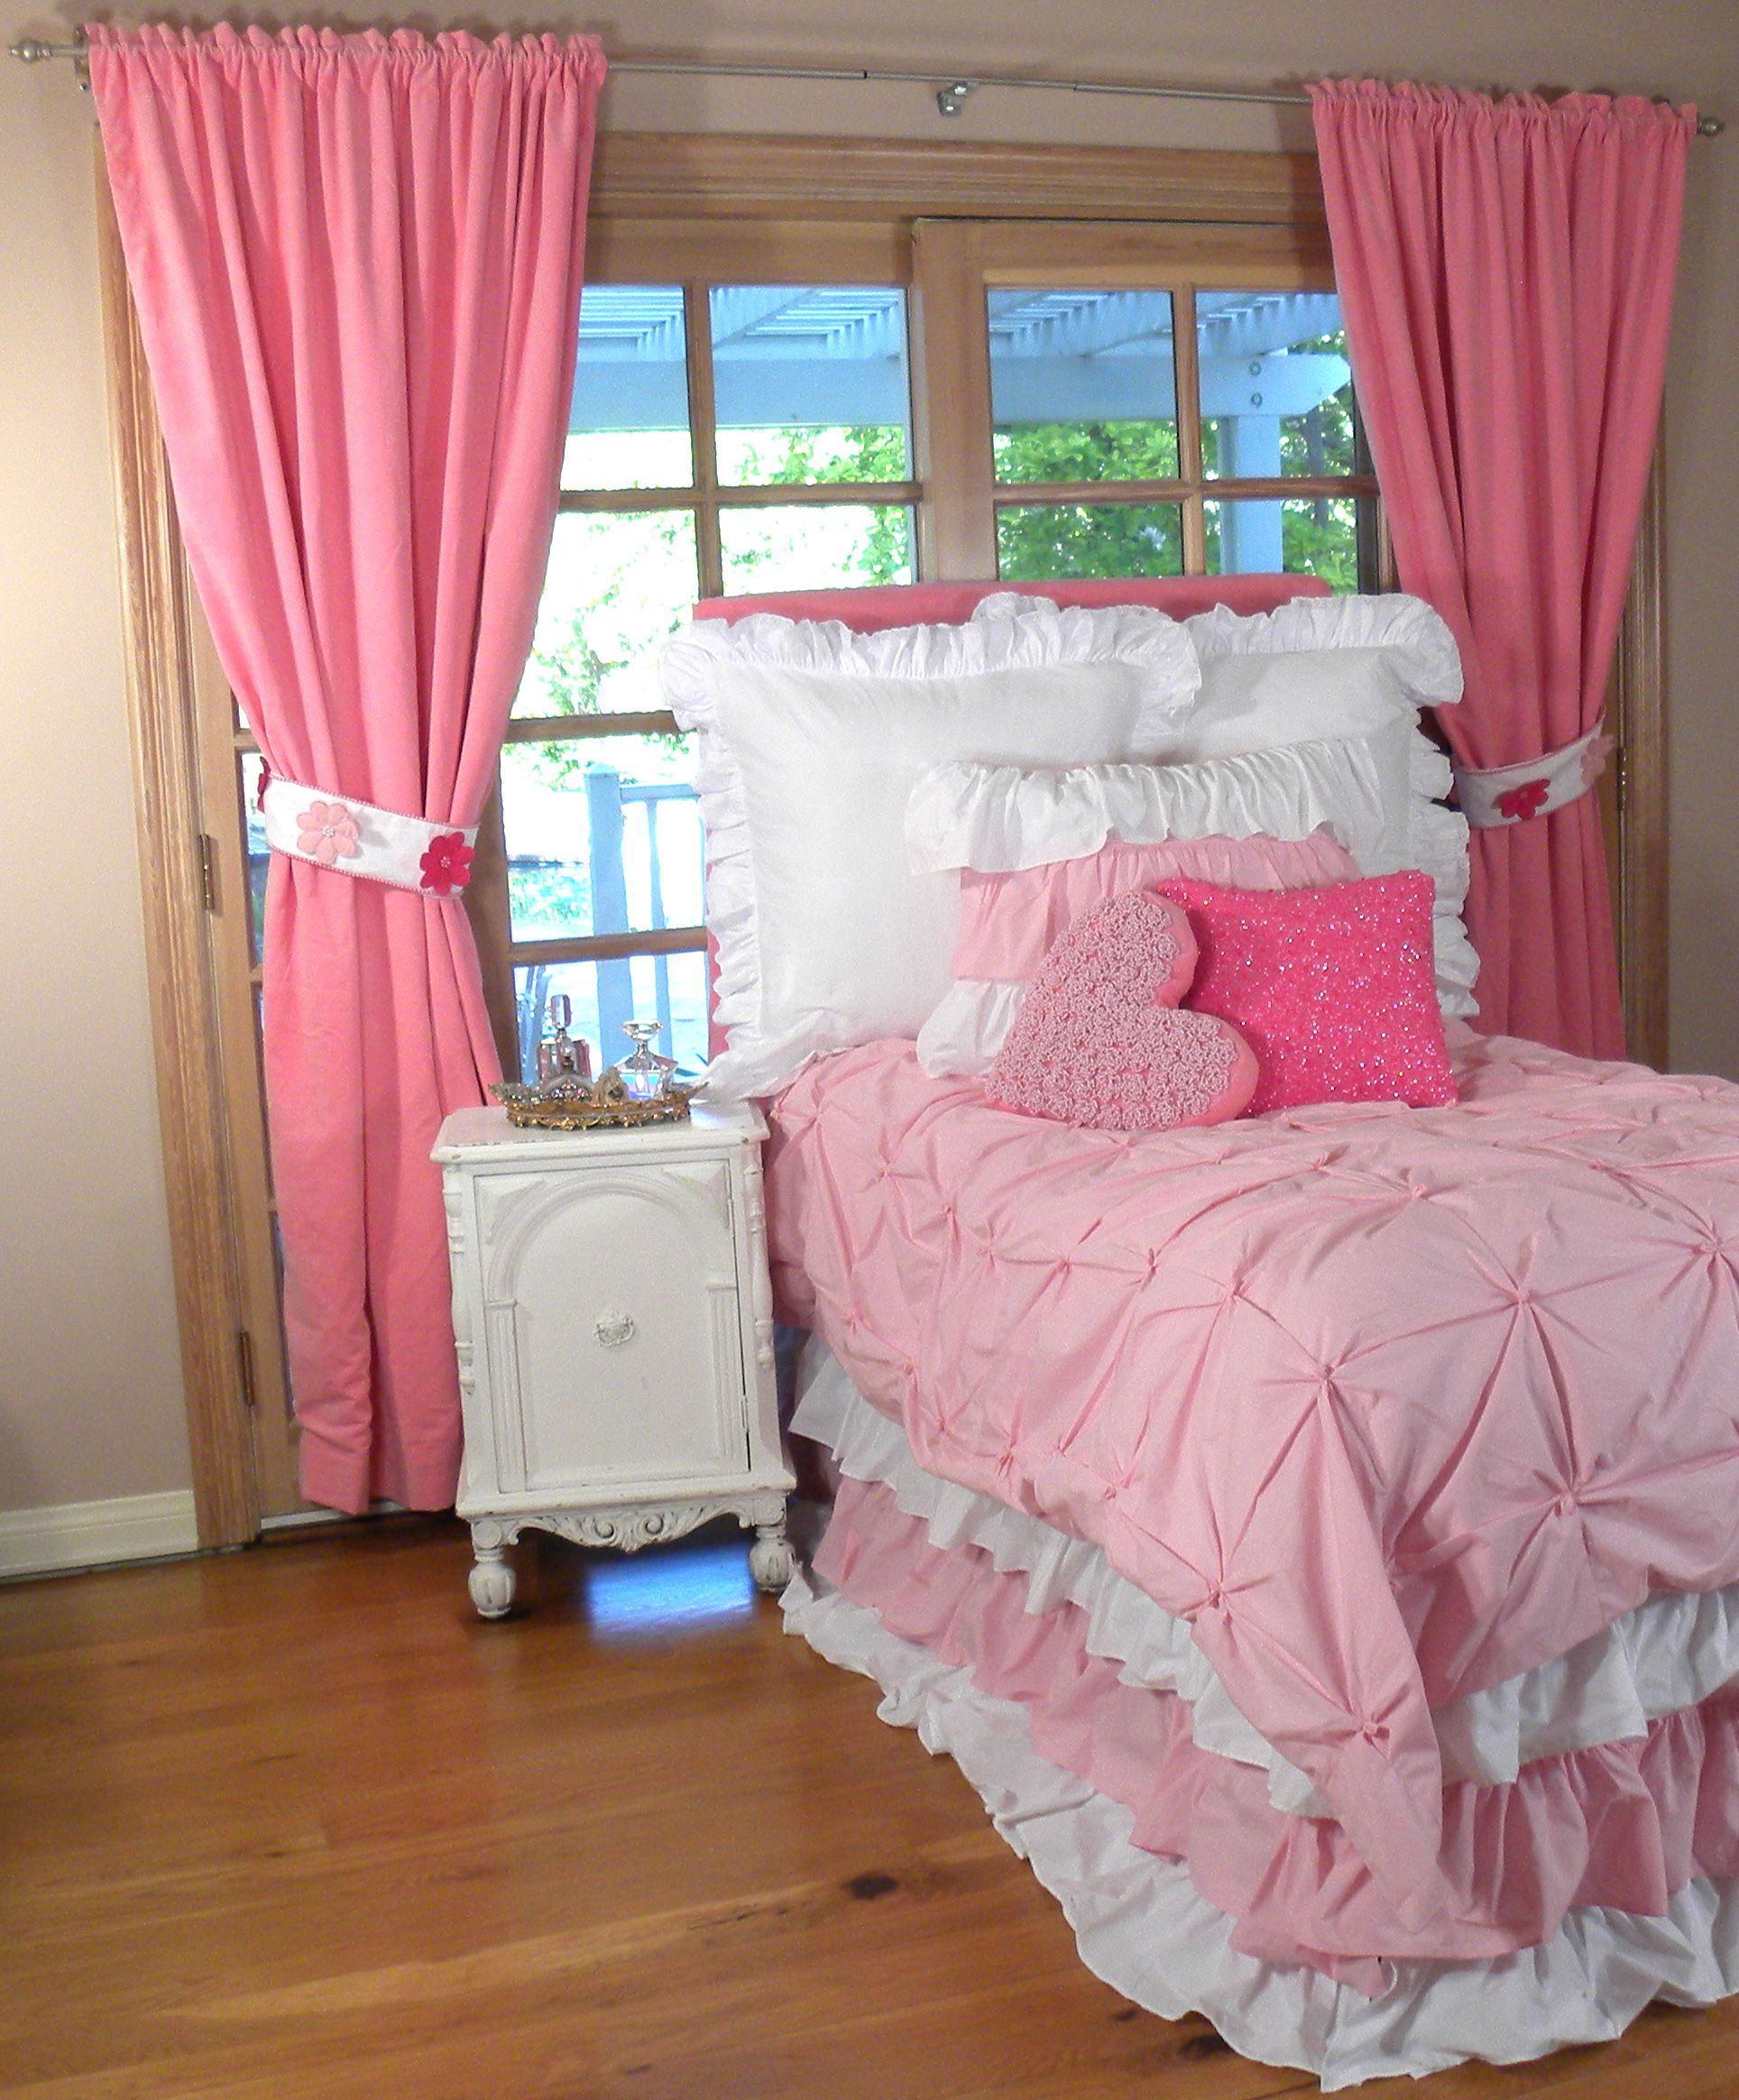 Bedroom Idea Present Tiny Bedroom Idea For Girl Present Pink Bay Window Curtain Feat Narrow Nightstand Design And Awesome Ruffle Bed Skirt Bedroom Beautiful Tiny Bedroom Ideas For Maximizing Style